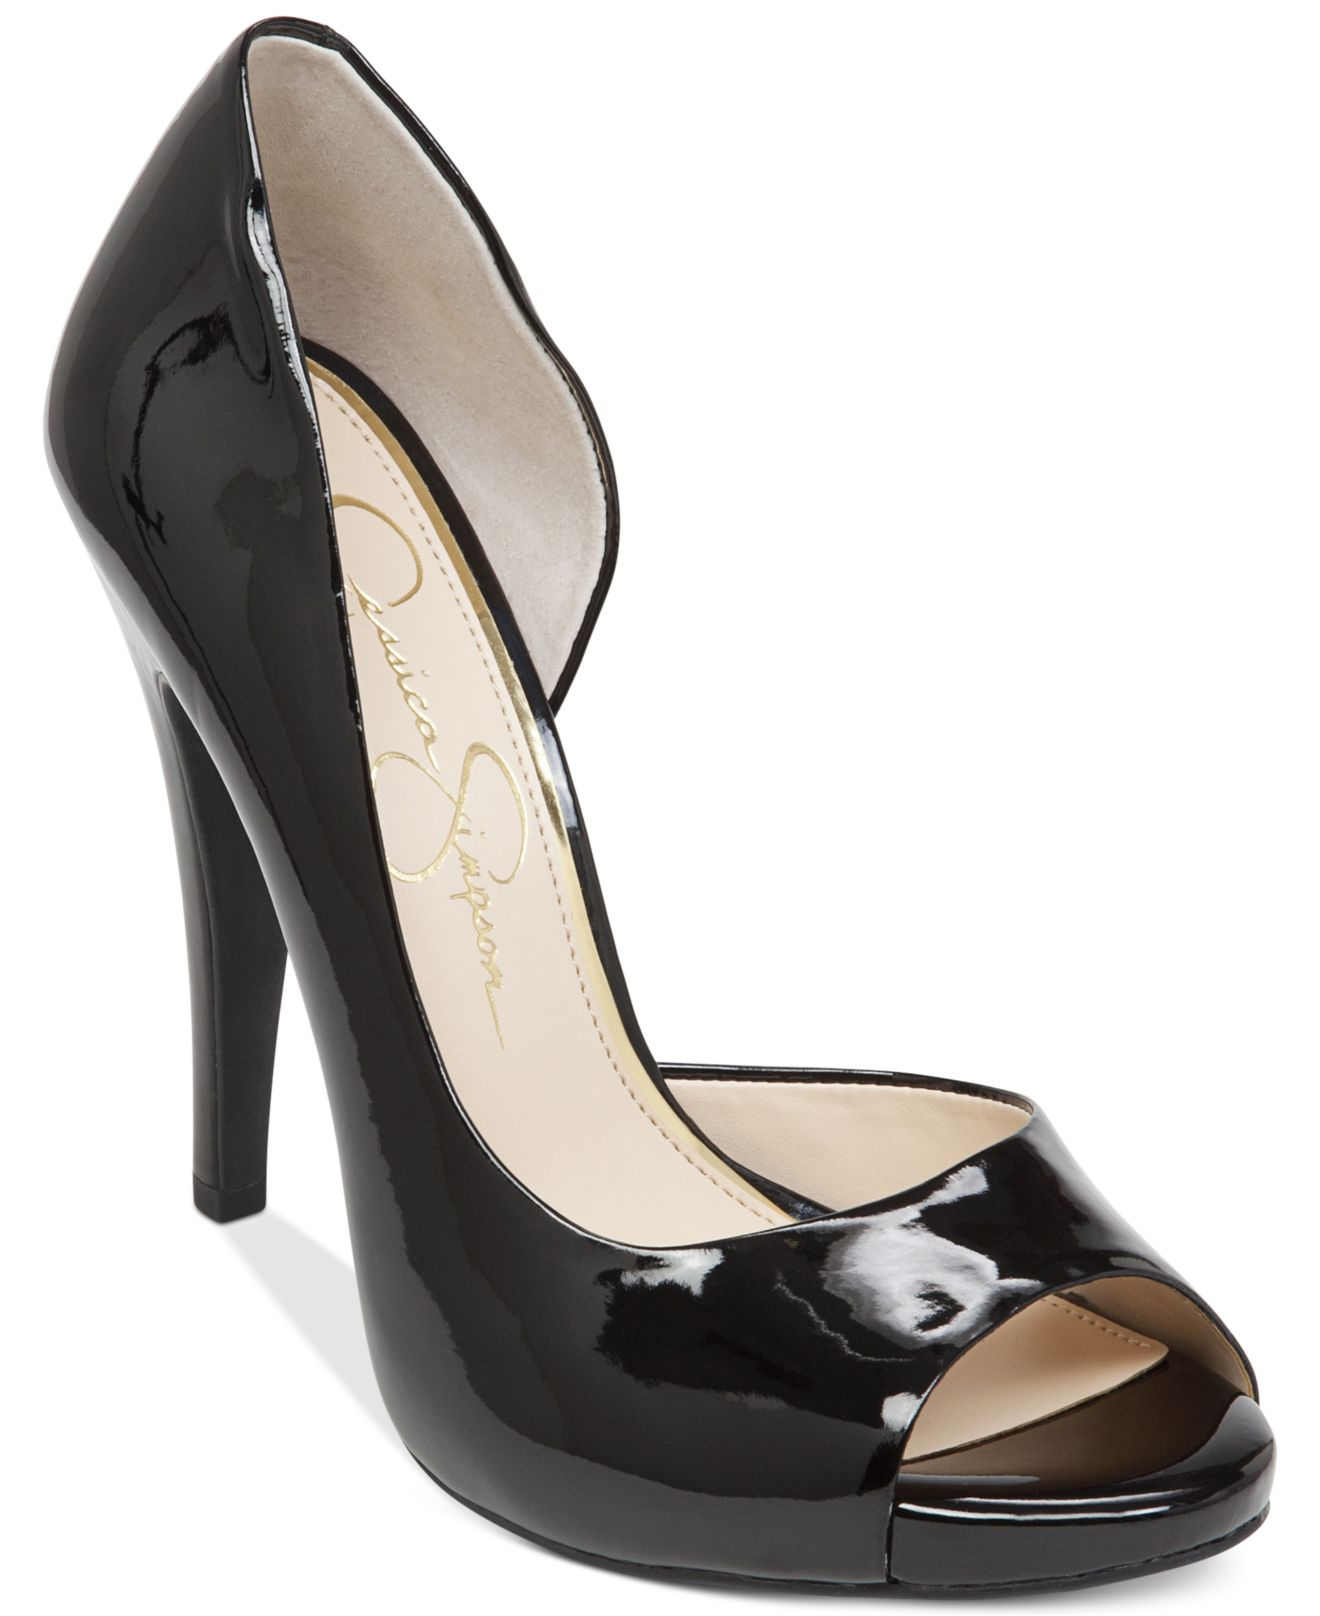 Lyst - Jessica Simpson Cian D'Orsay Pumps in Black